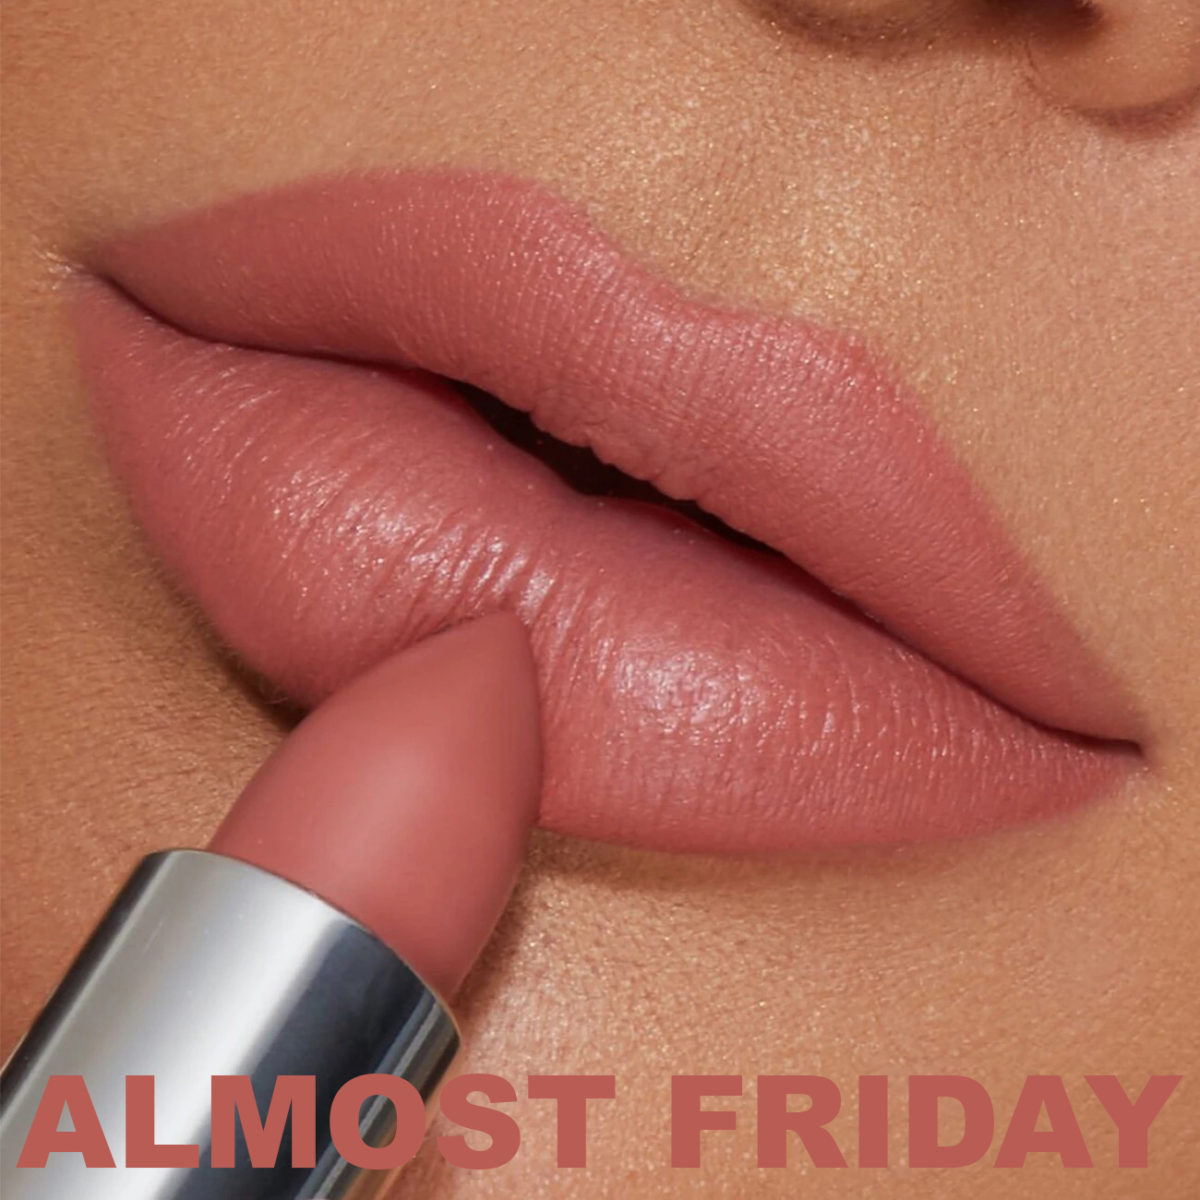 Kylie Cosmetics Almost Friday Matte Lipstick Dupes